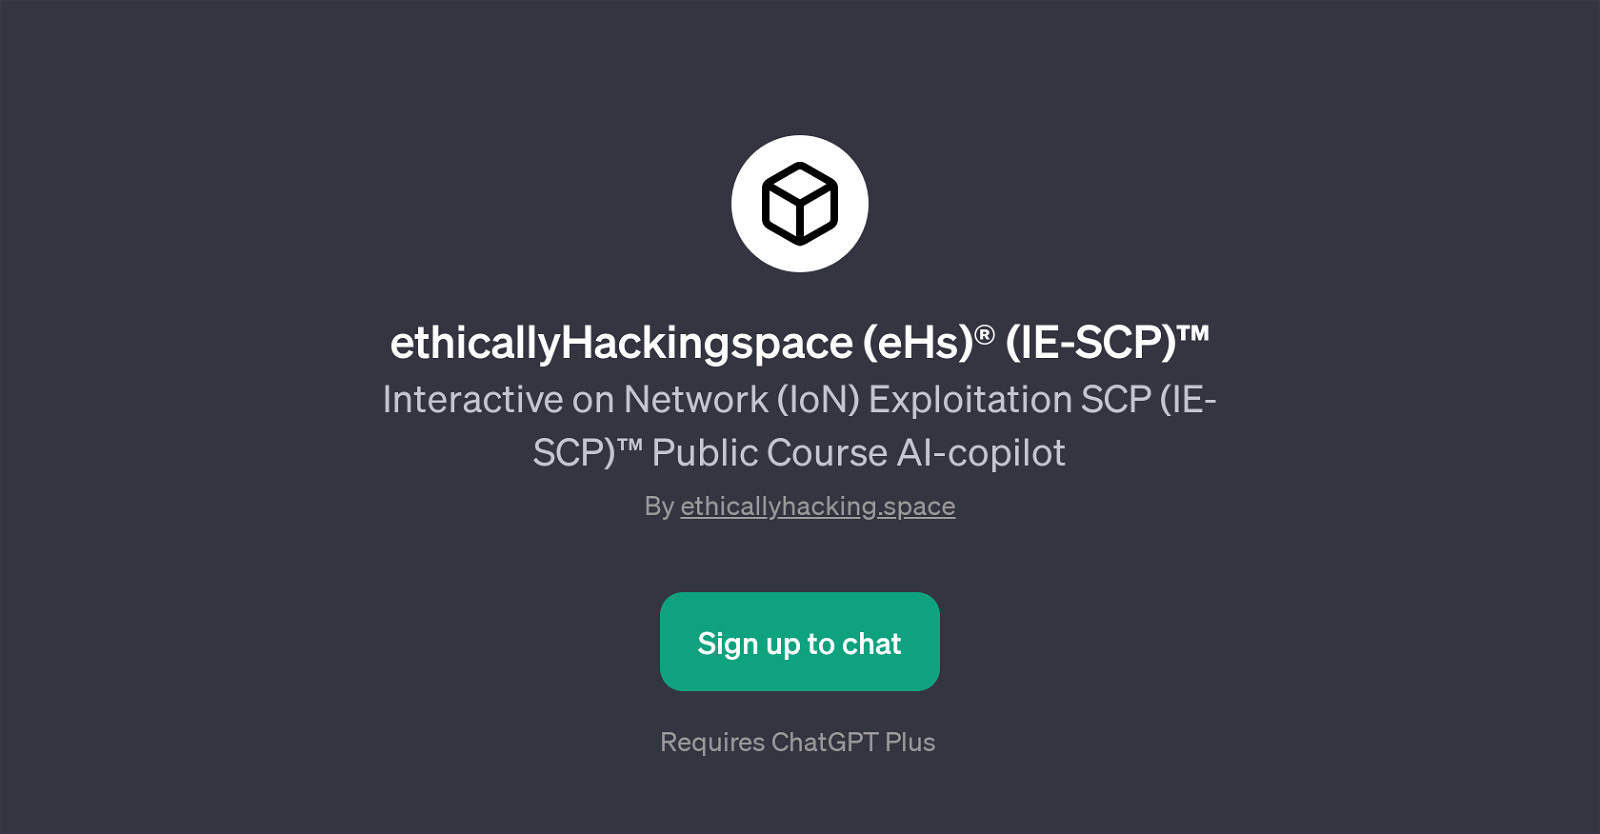 ethicallyHackingspace (eHs) (IE-SCP) website